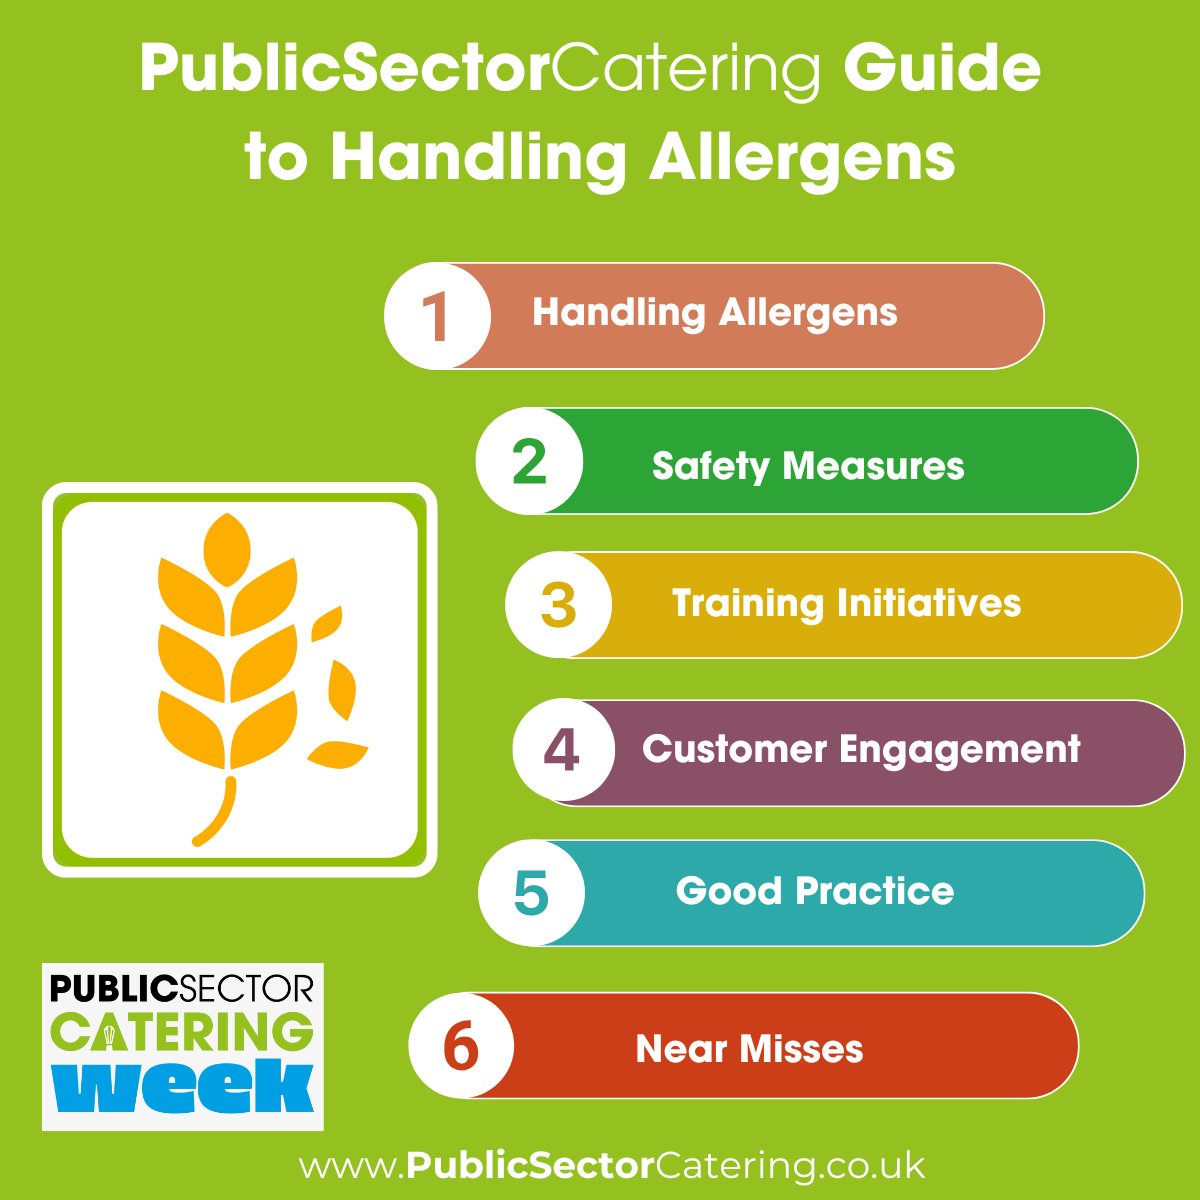 The PSC Guide to Handling Allergens has been compiled with input from The Russell Partnership and Hospitality Allergen Support UK with a foreword from Nadim Ednan-Laperouse OBE, co-founder of @NatashasLegacy

You can access the guide online mag.publicsectorcatering.co.uk/books/ktsf/#p=1

#PSCWeek